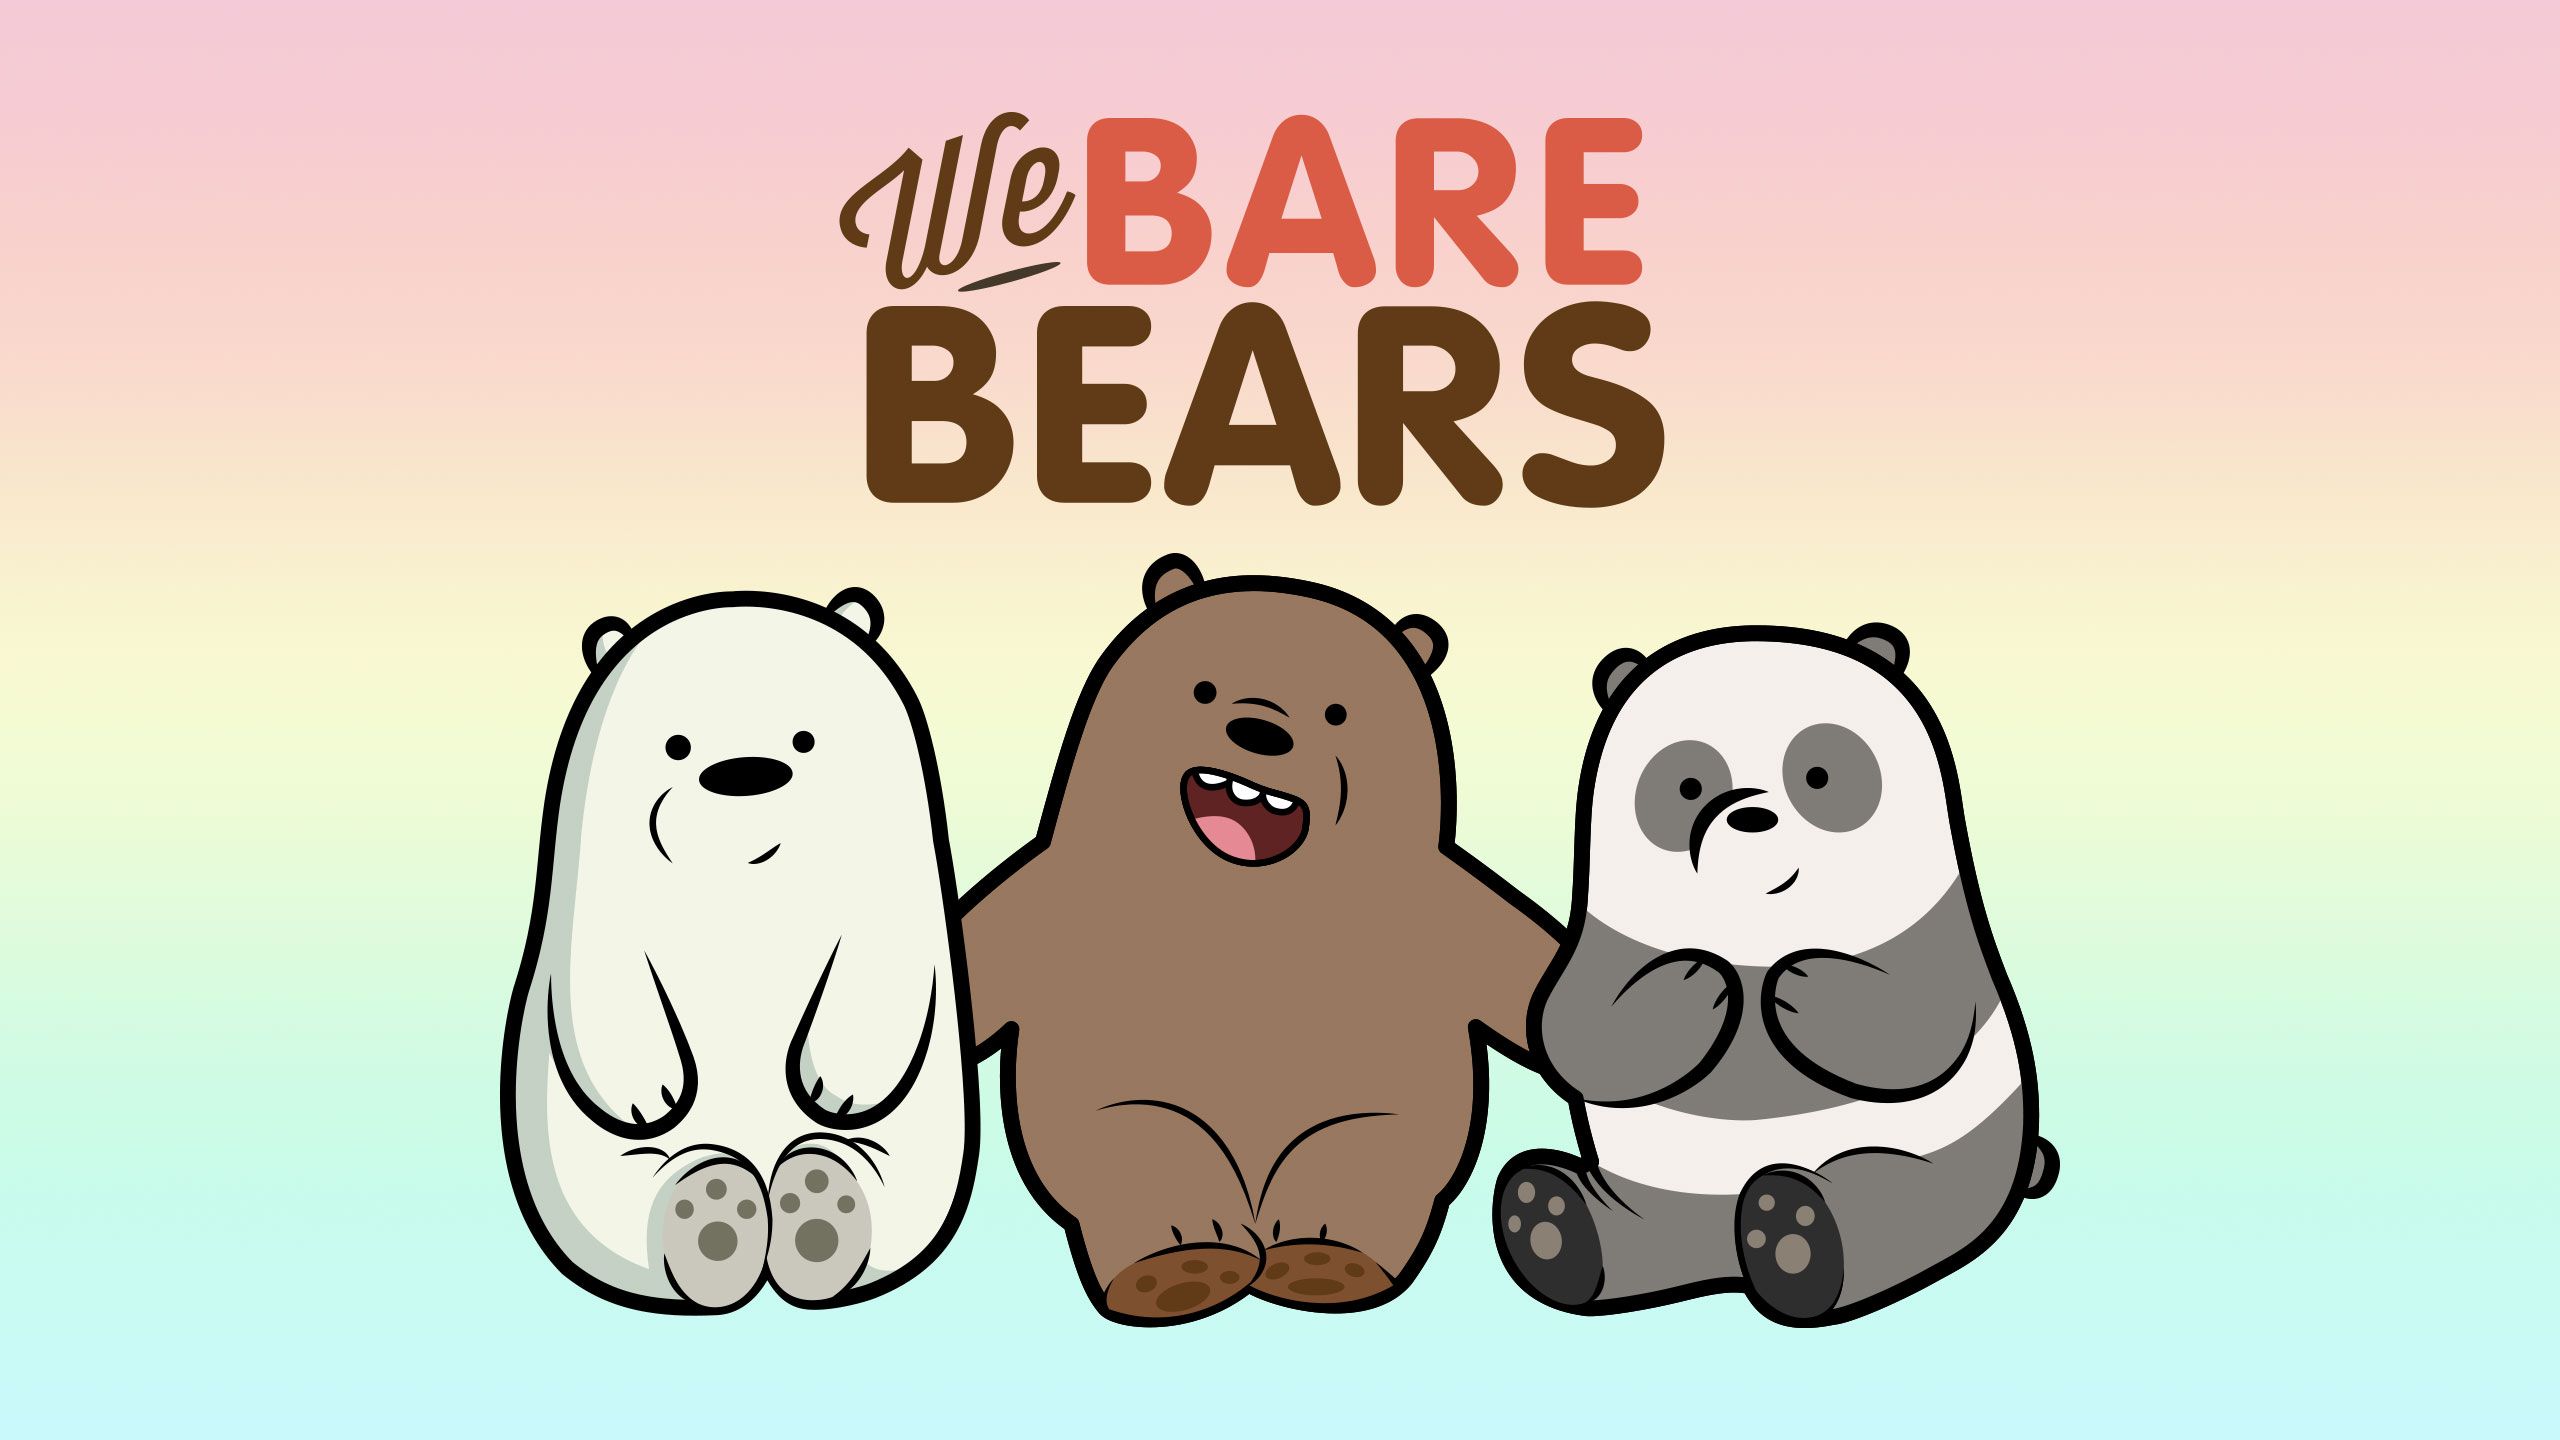 We Bare Bears wallpaper with all three bears sitting down - We Bare Bears